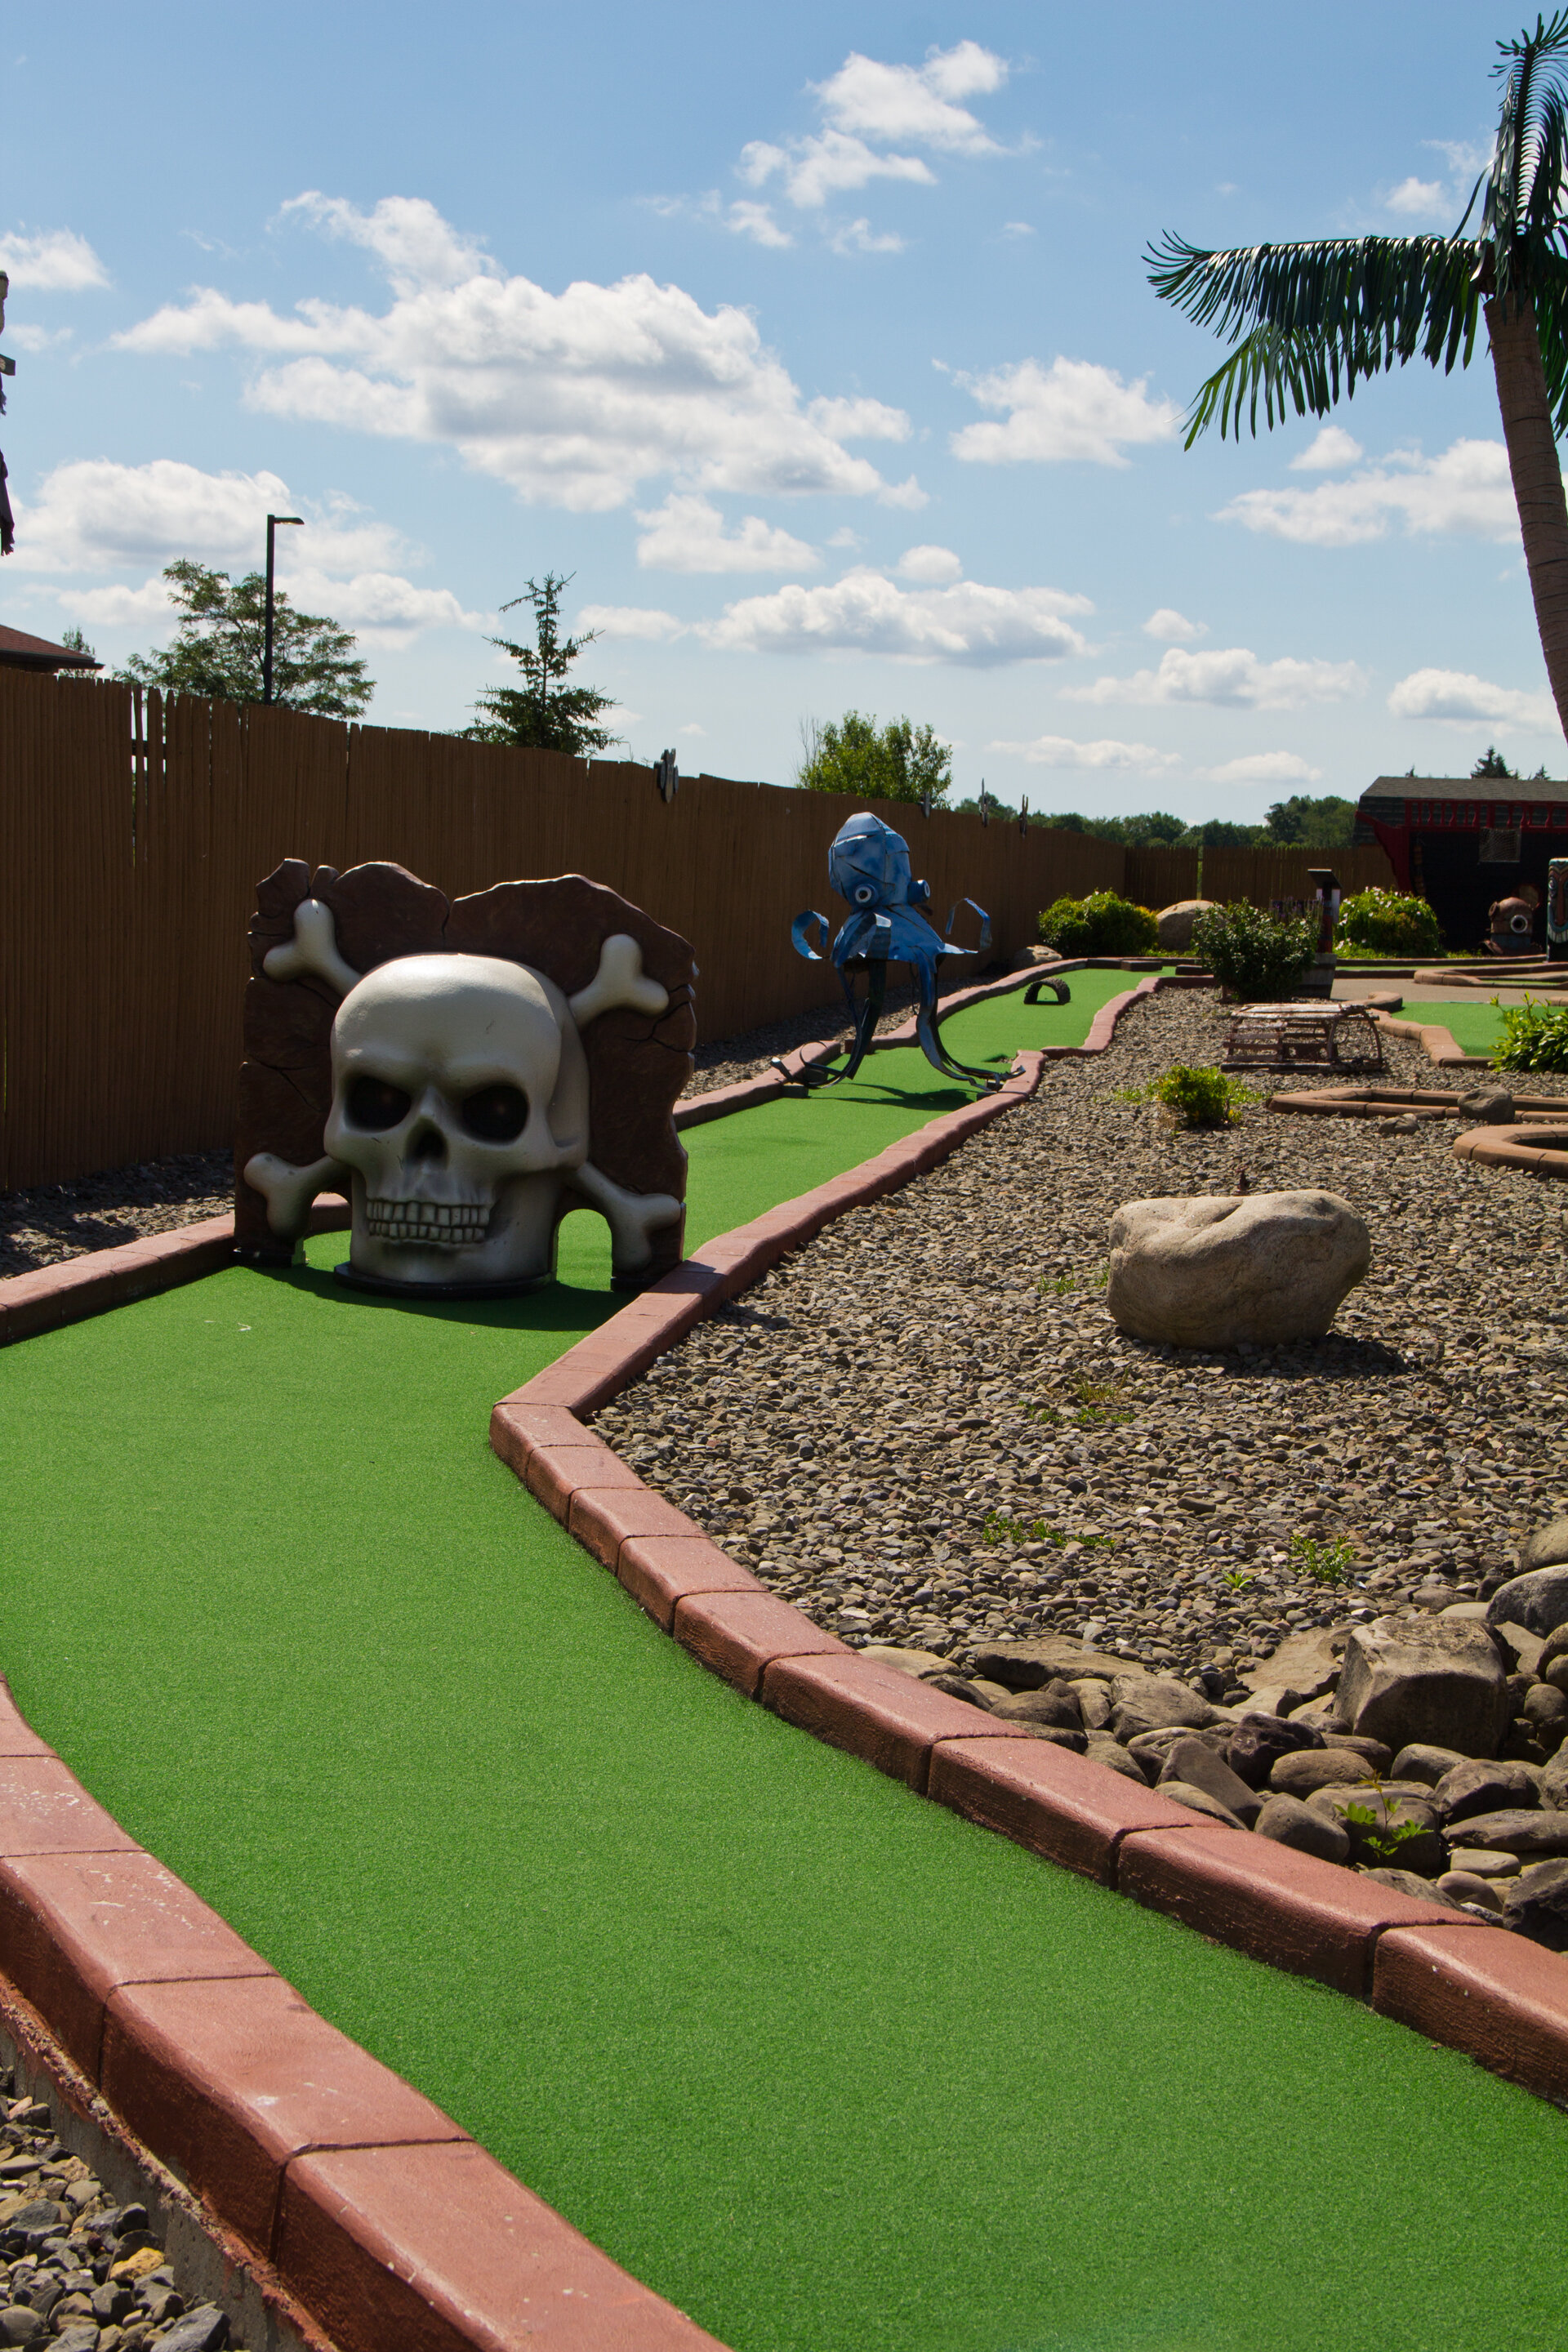 Part of the world’s longest mini golf hole in Cortland, NY.